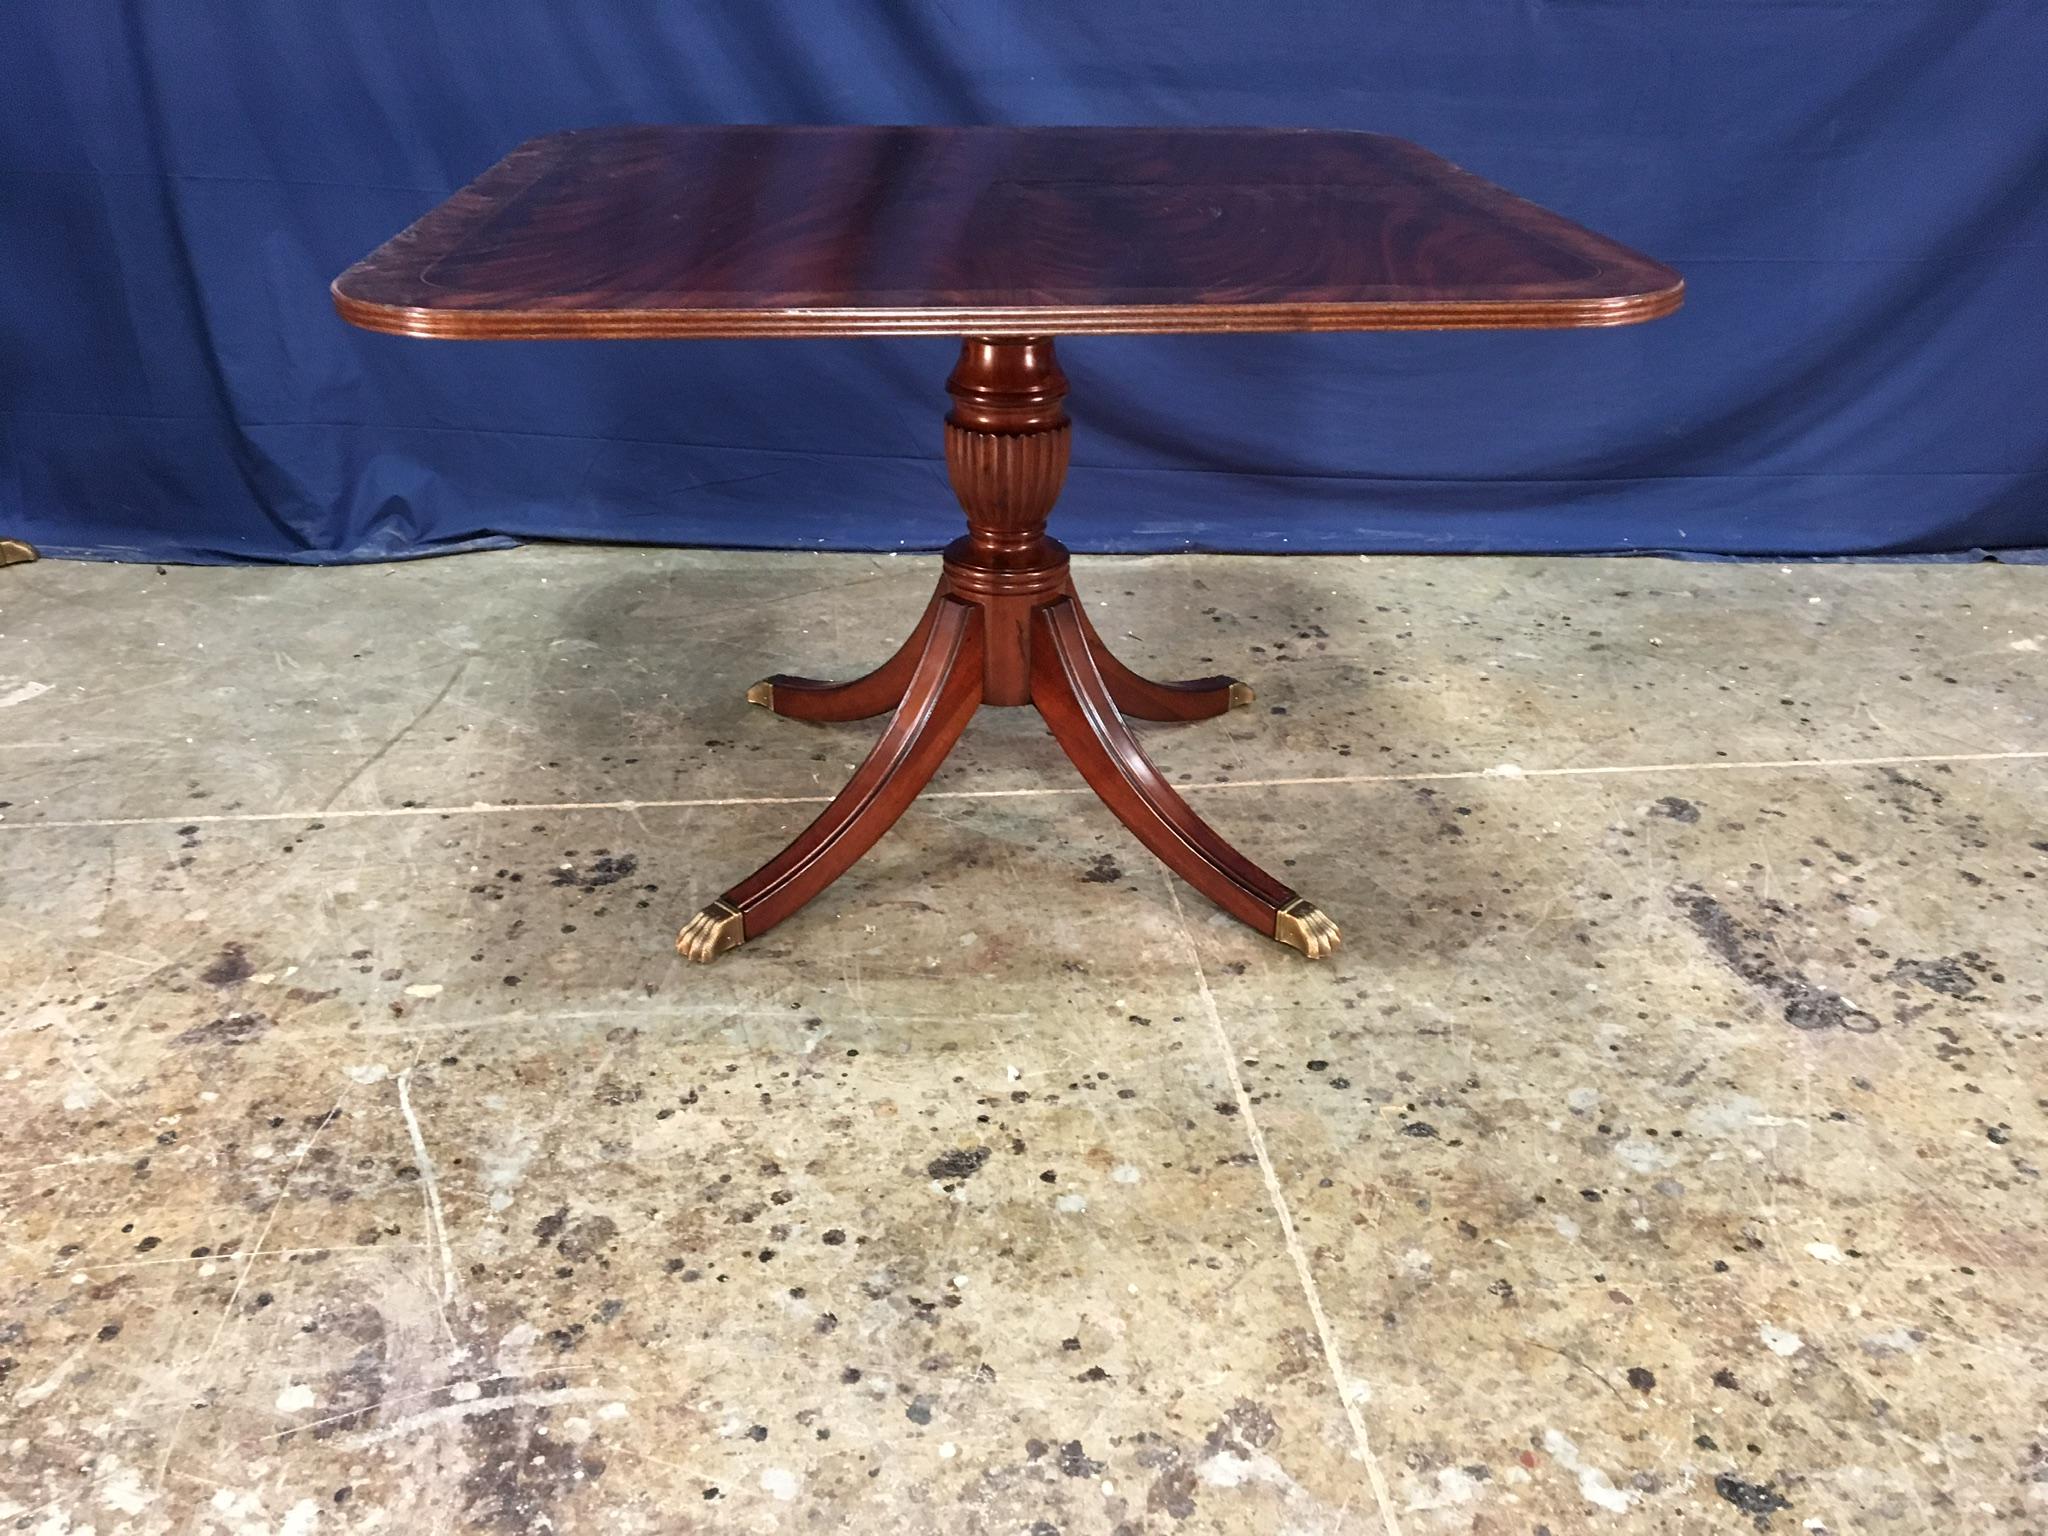 This is a made-to-order square traditional mahogany accent/foyer table made in the Leighton Hall shop. It features a field of reverse-slip-matched crotch mahogany with a contrasting border separated by ebony and white maple inlay lines. It has a